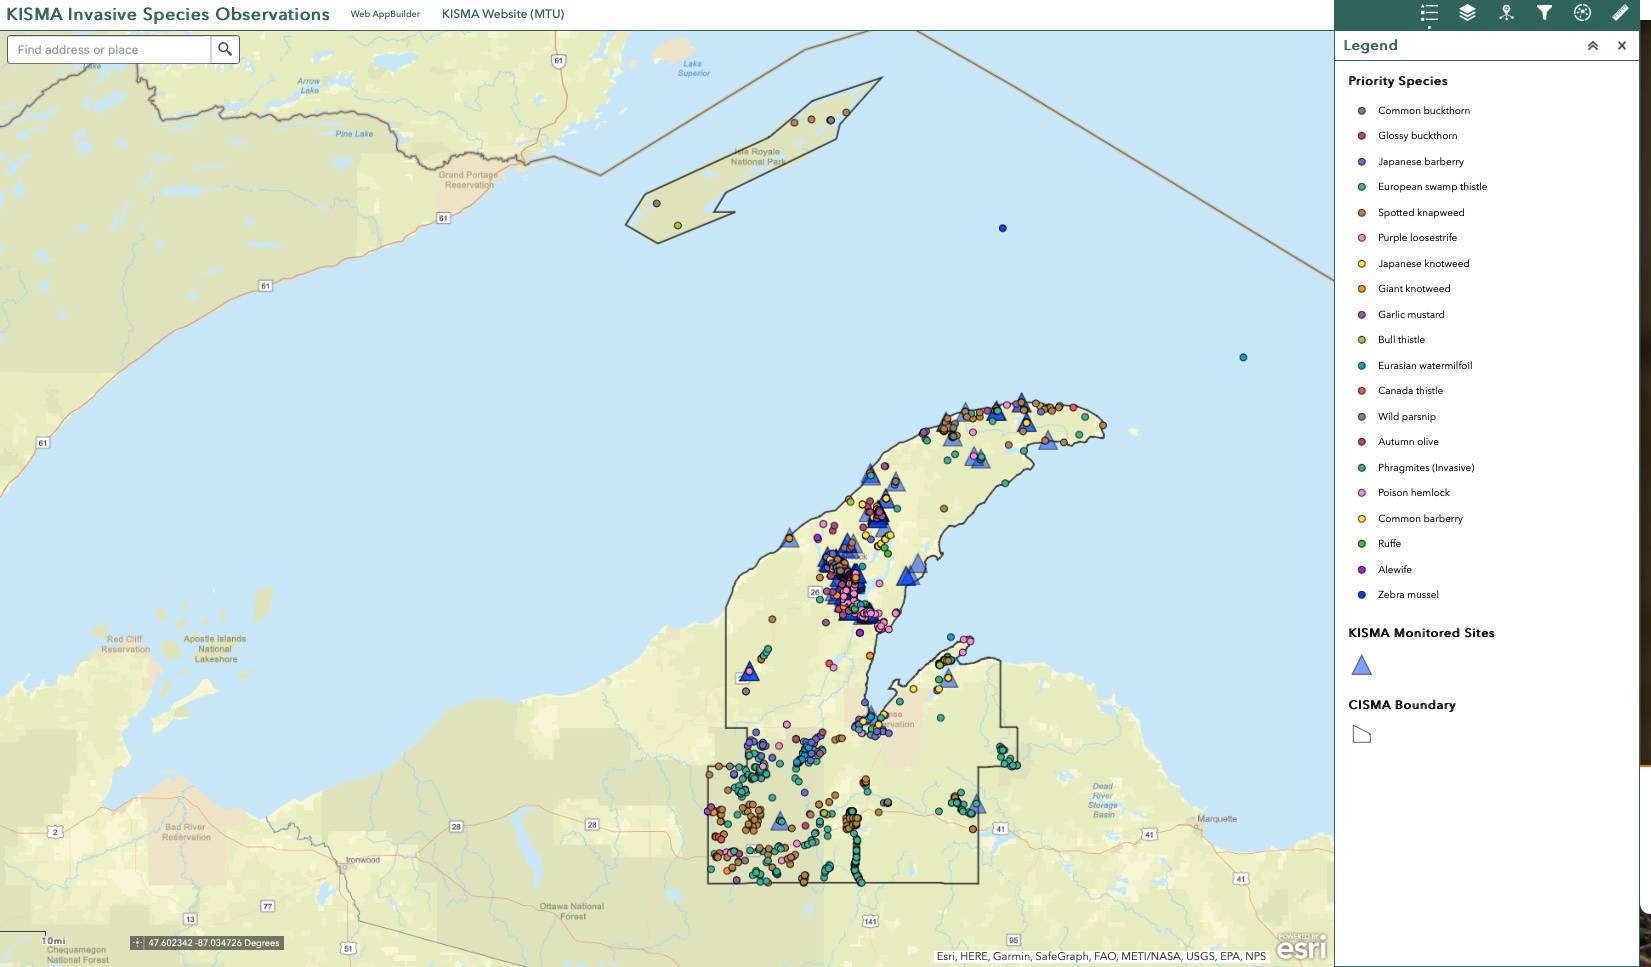 KISMA priority map of invasive species present within Baraga, Houghton, and Keweenaw counties as of the 2021 field season